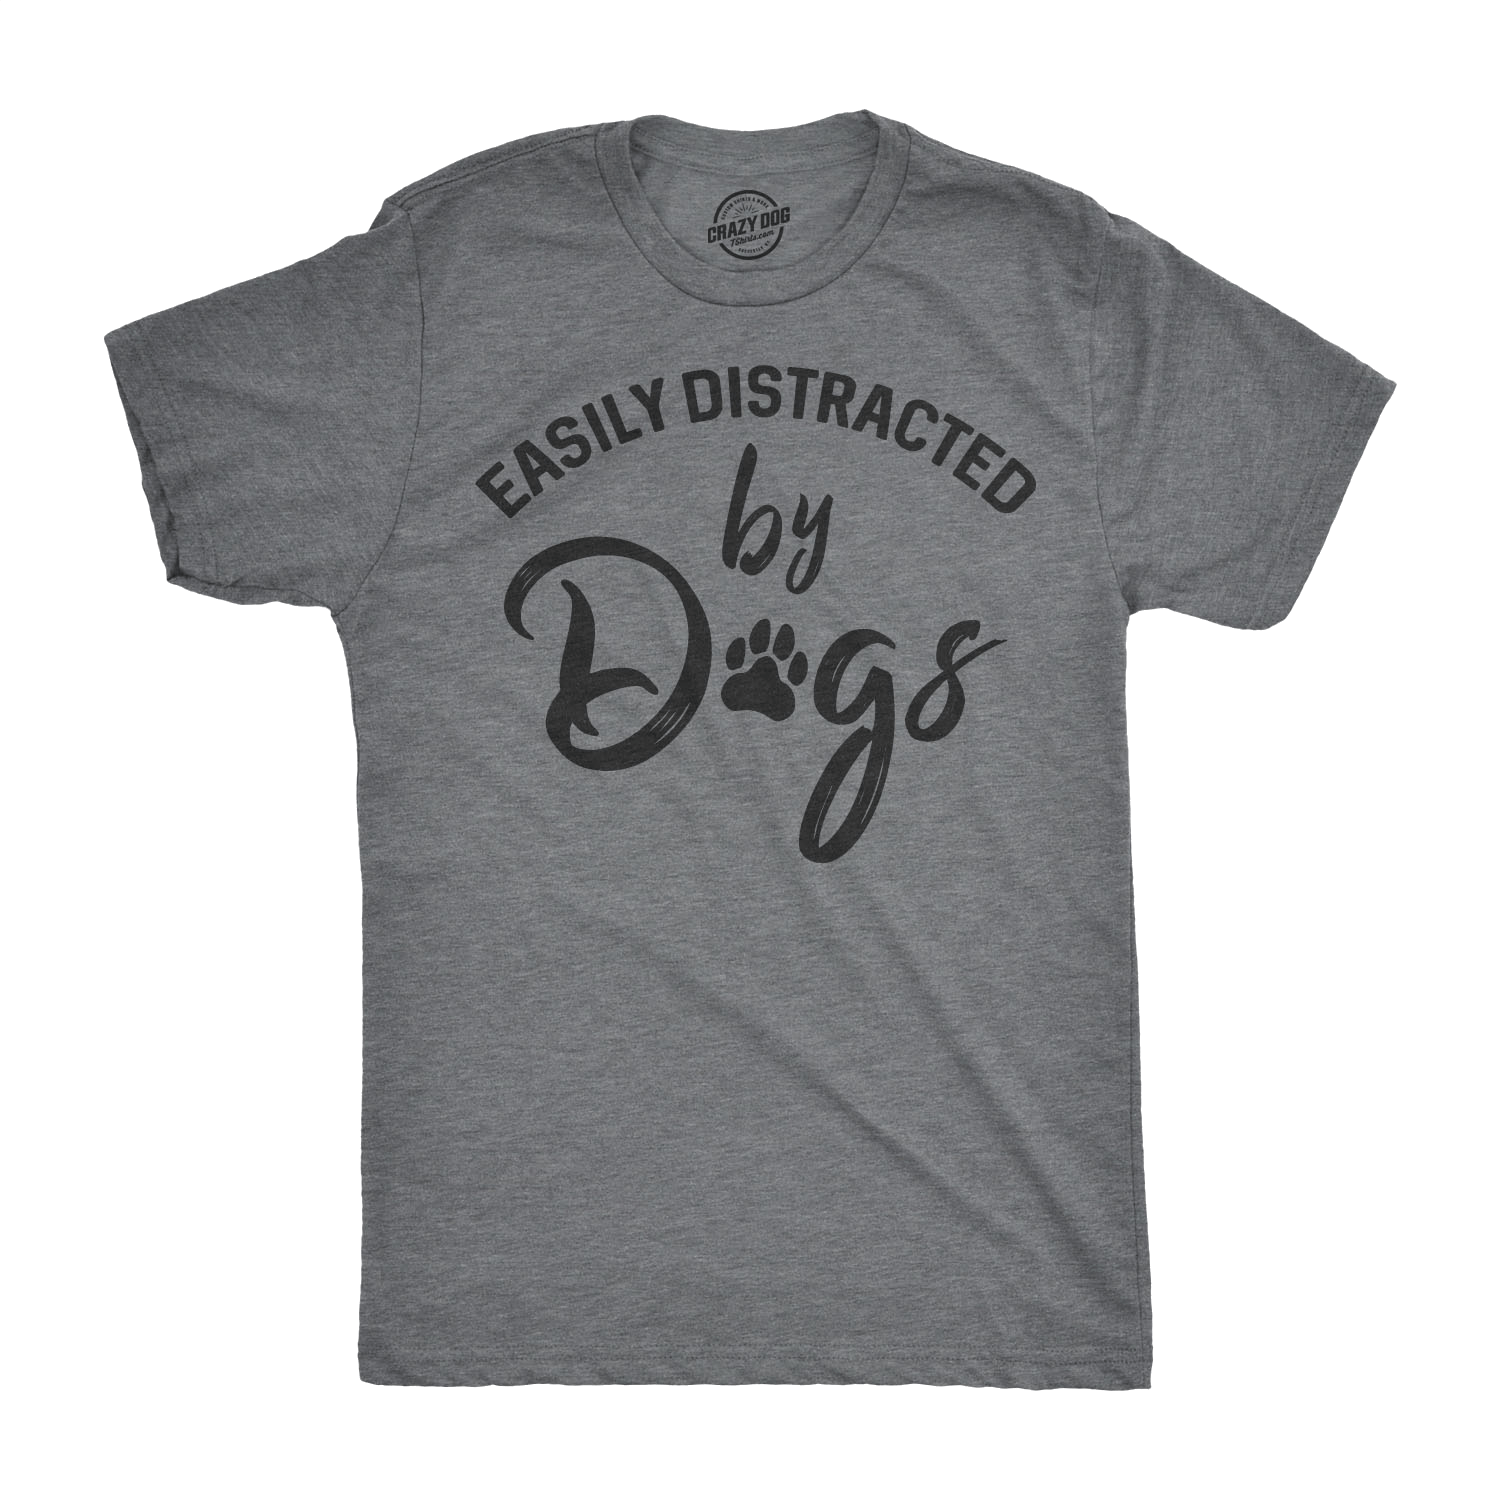 Easily Distracted By Dogs Men's Tshirt  -  Crazy Dog T-Shirts